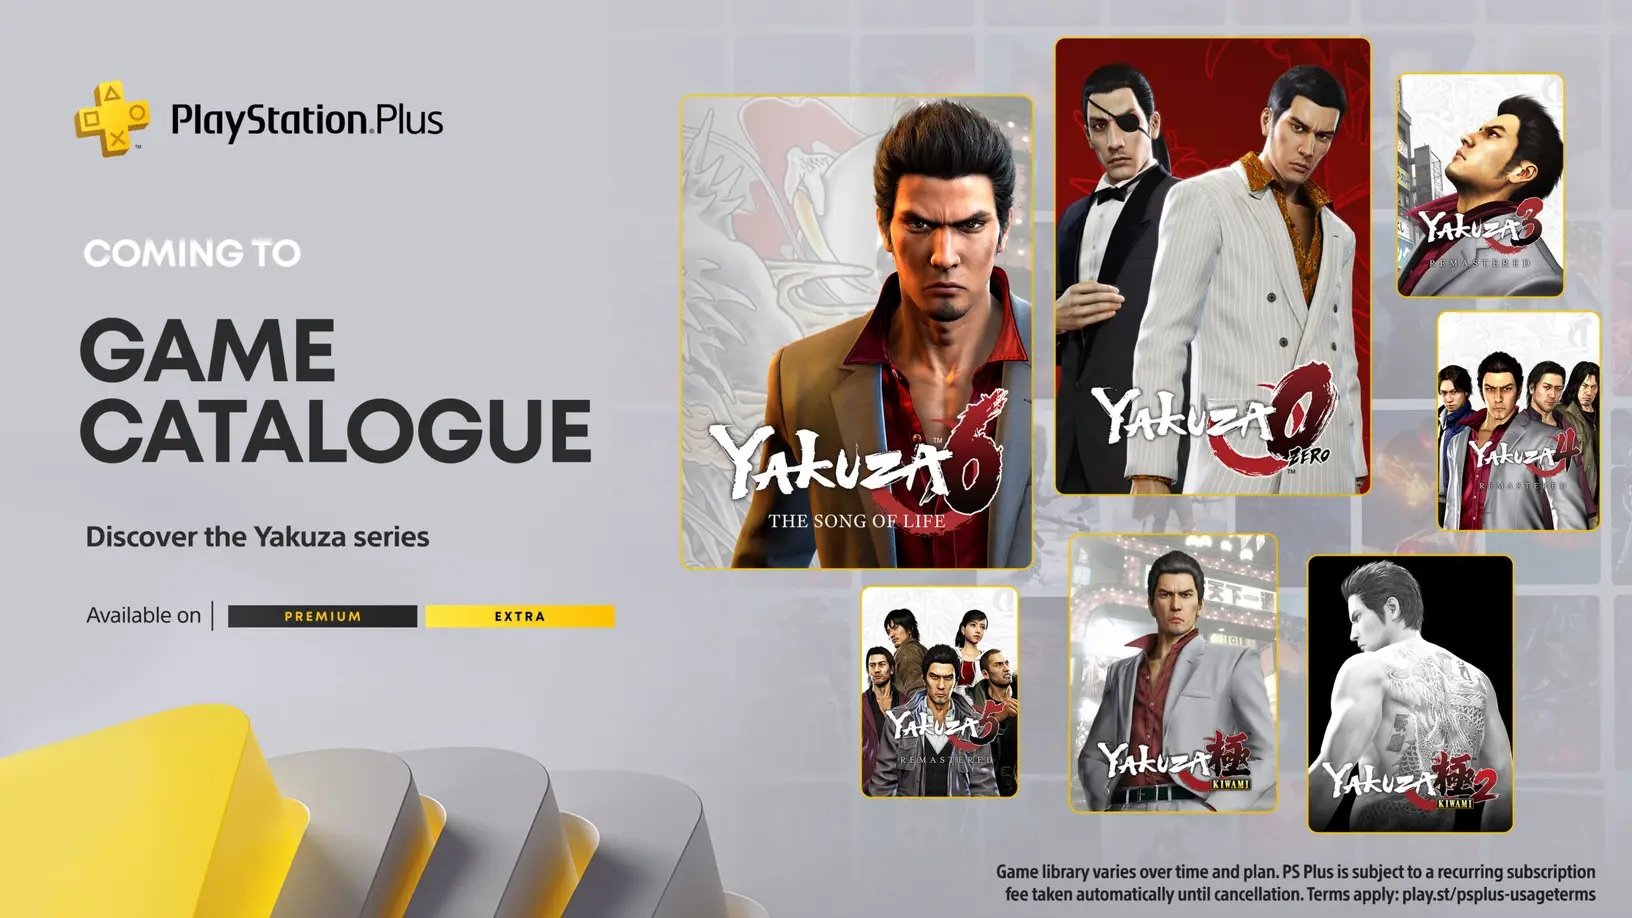 PlayStation Plus is adding 8 Yakuza games in 2022